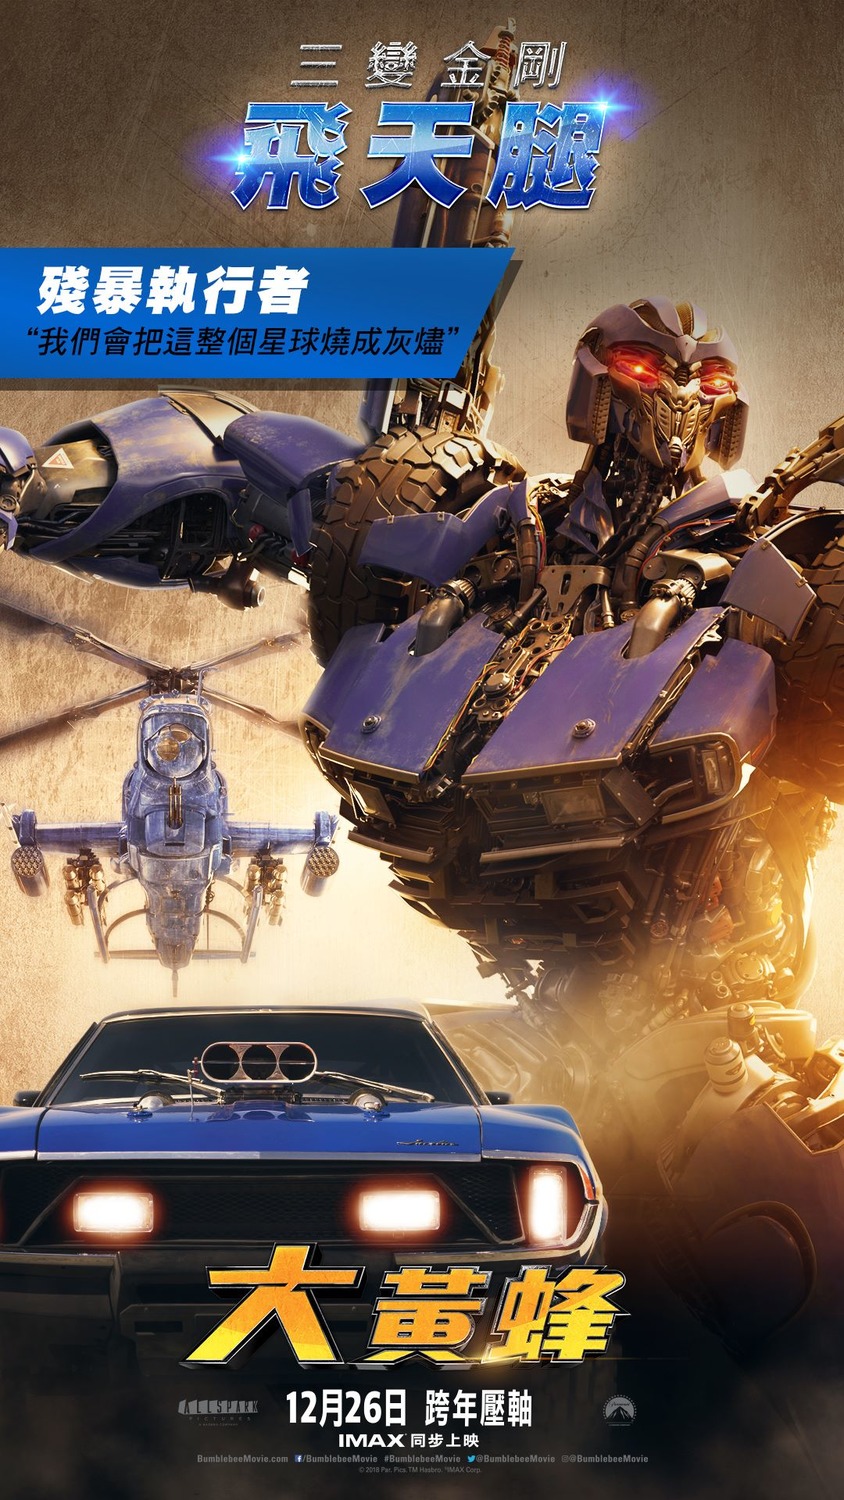 Extra Large Movie Poster Image for Bumblebee (#10 of 21)